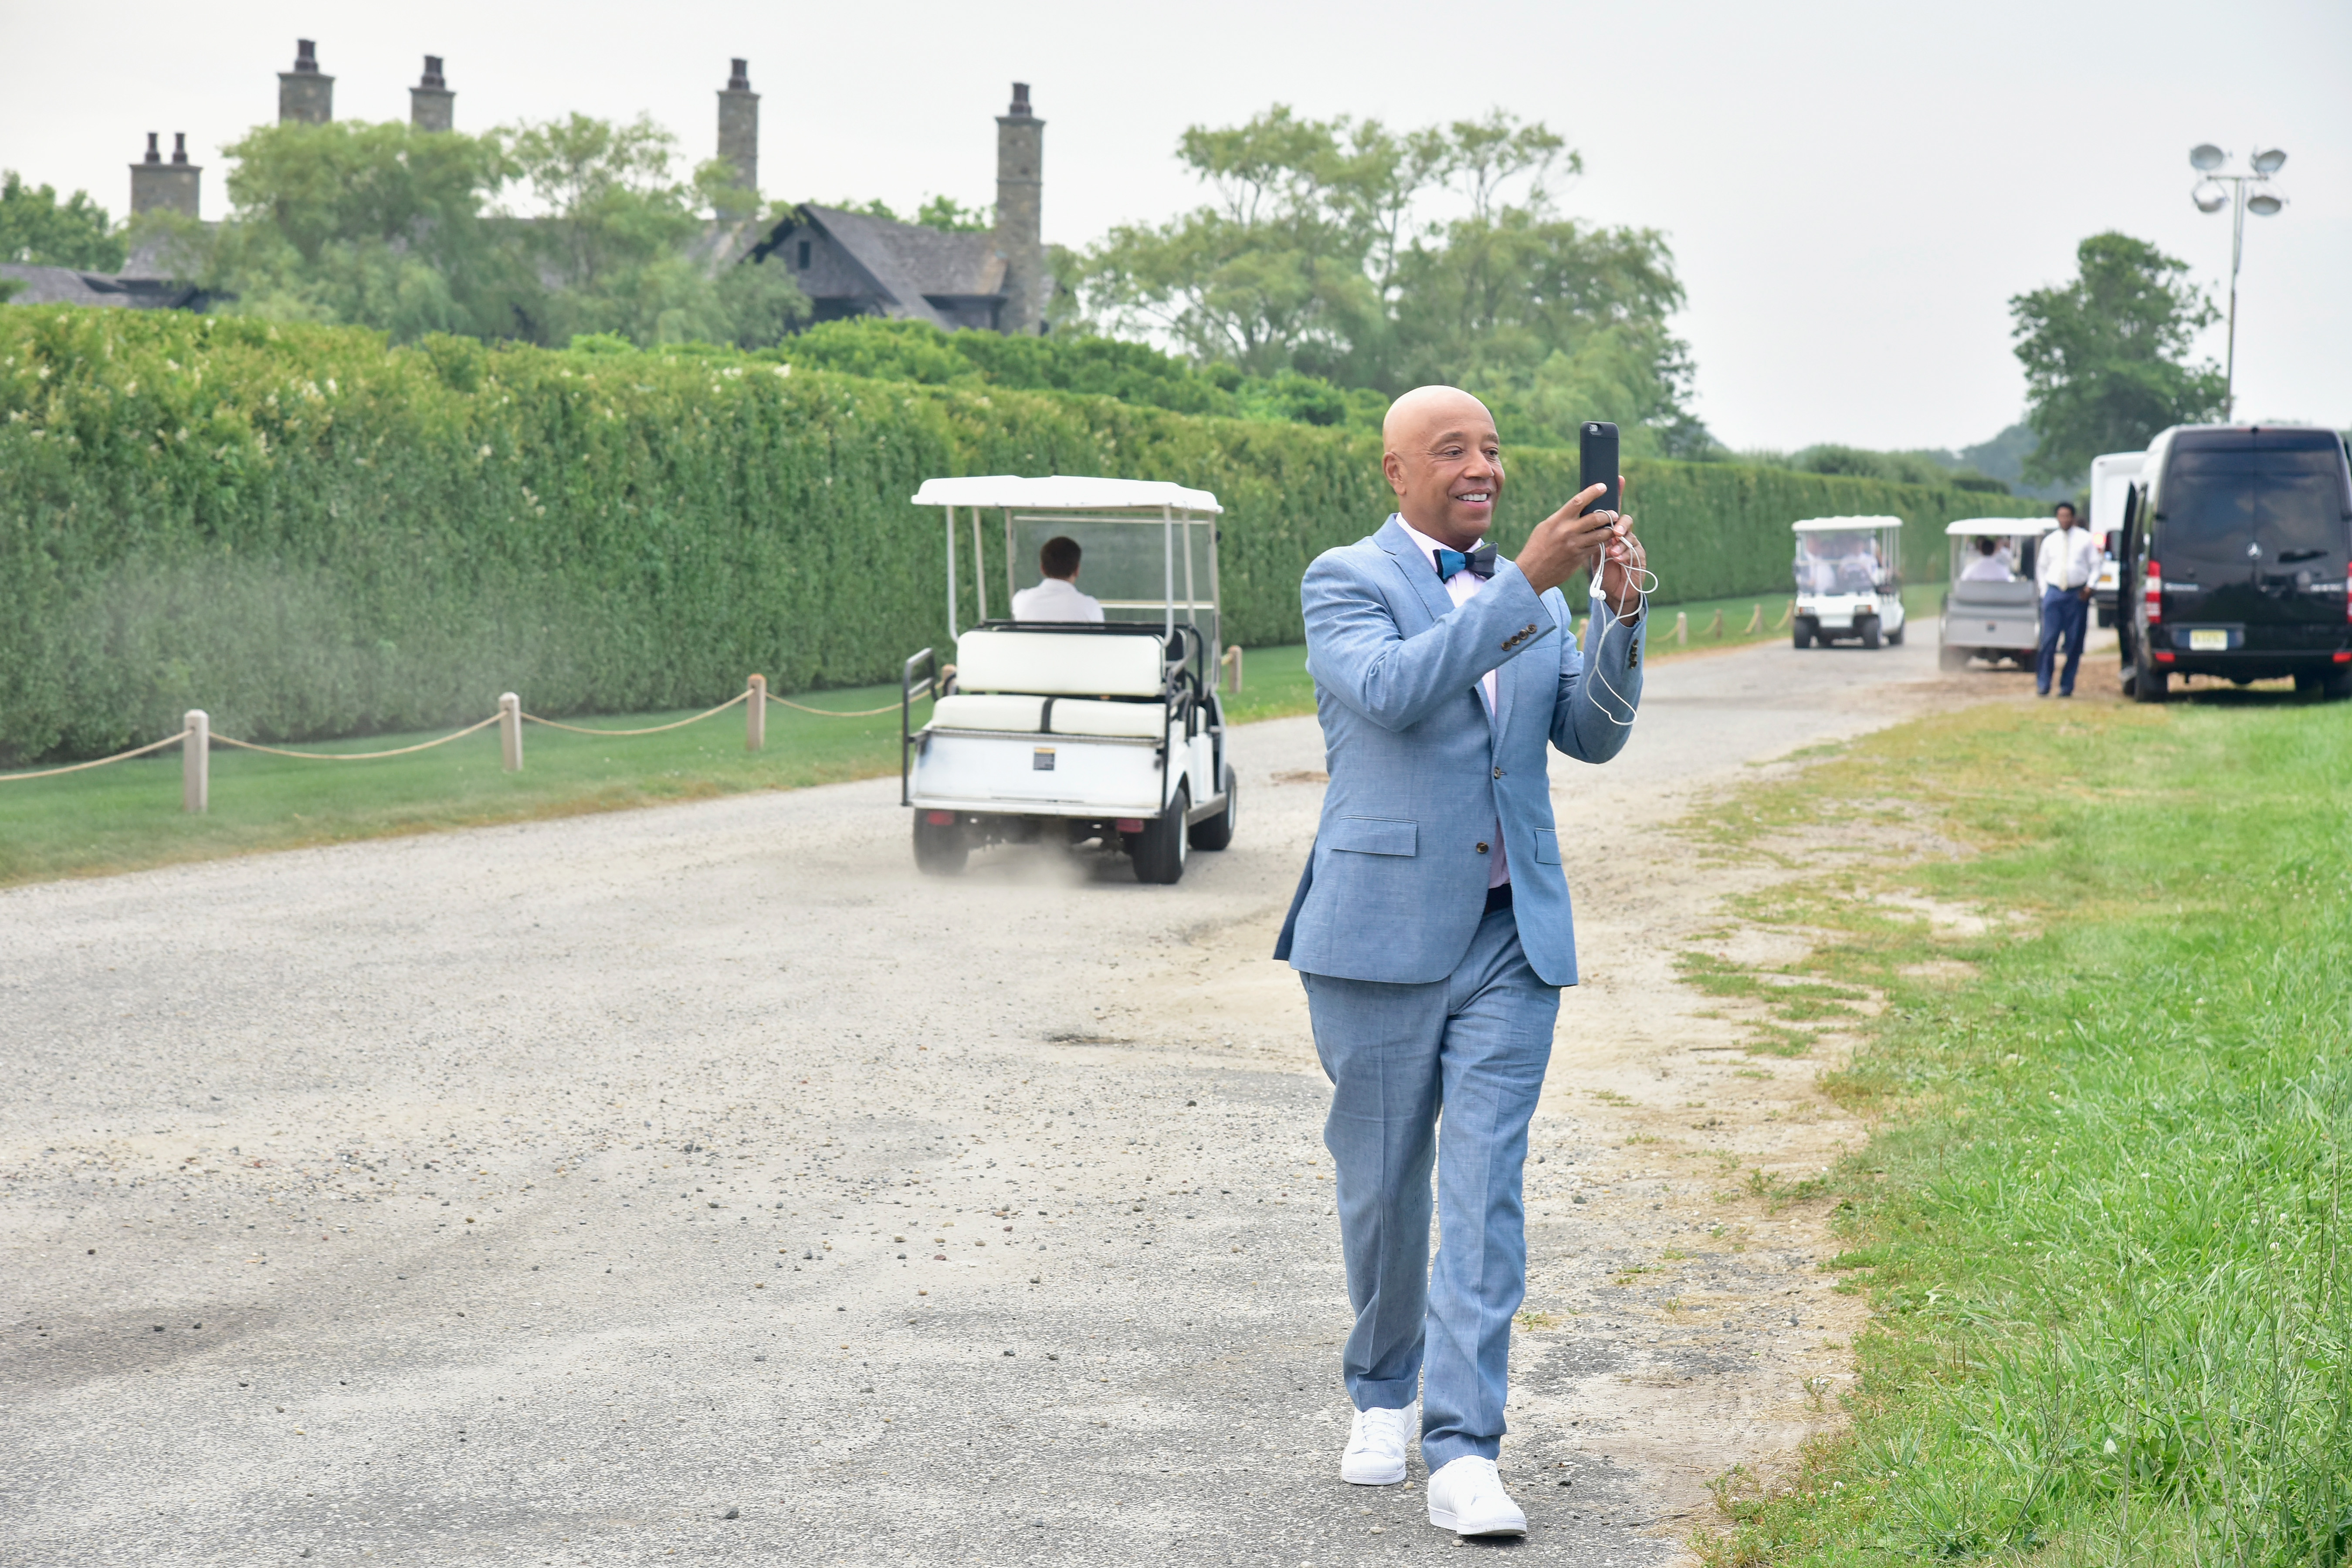 Russell Simmons attends Rush Philanthropic Arts Foundation's 2016 ART FOR LIFE Benefit presented by Bombay Sapphire Gin at Fairview Farms. Courtesy Eugene Gologursky/Getty Images for Bombay Sapphire.